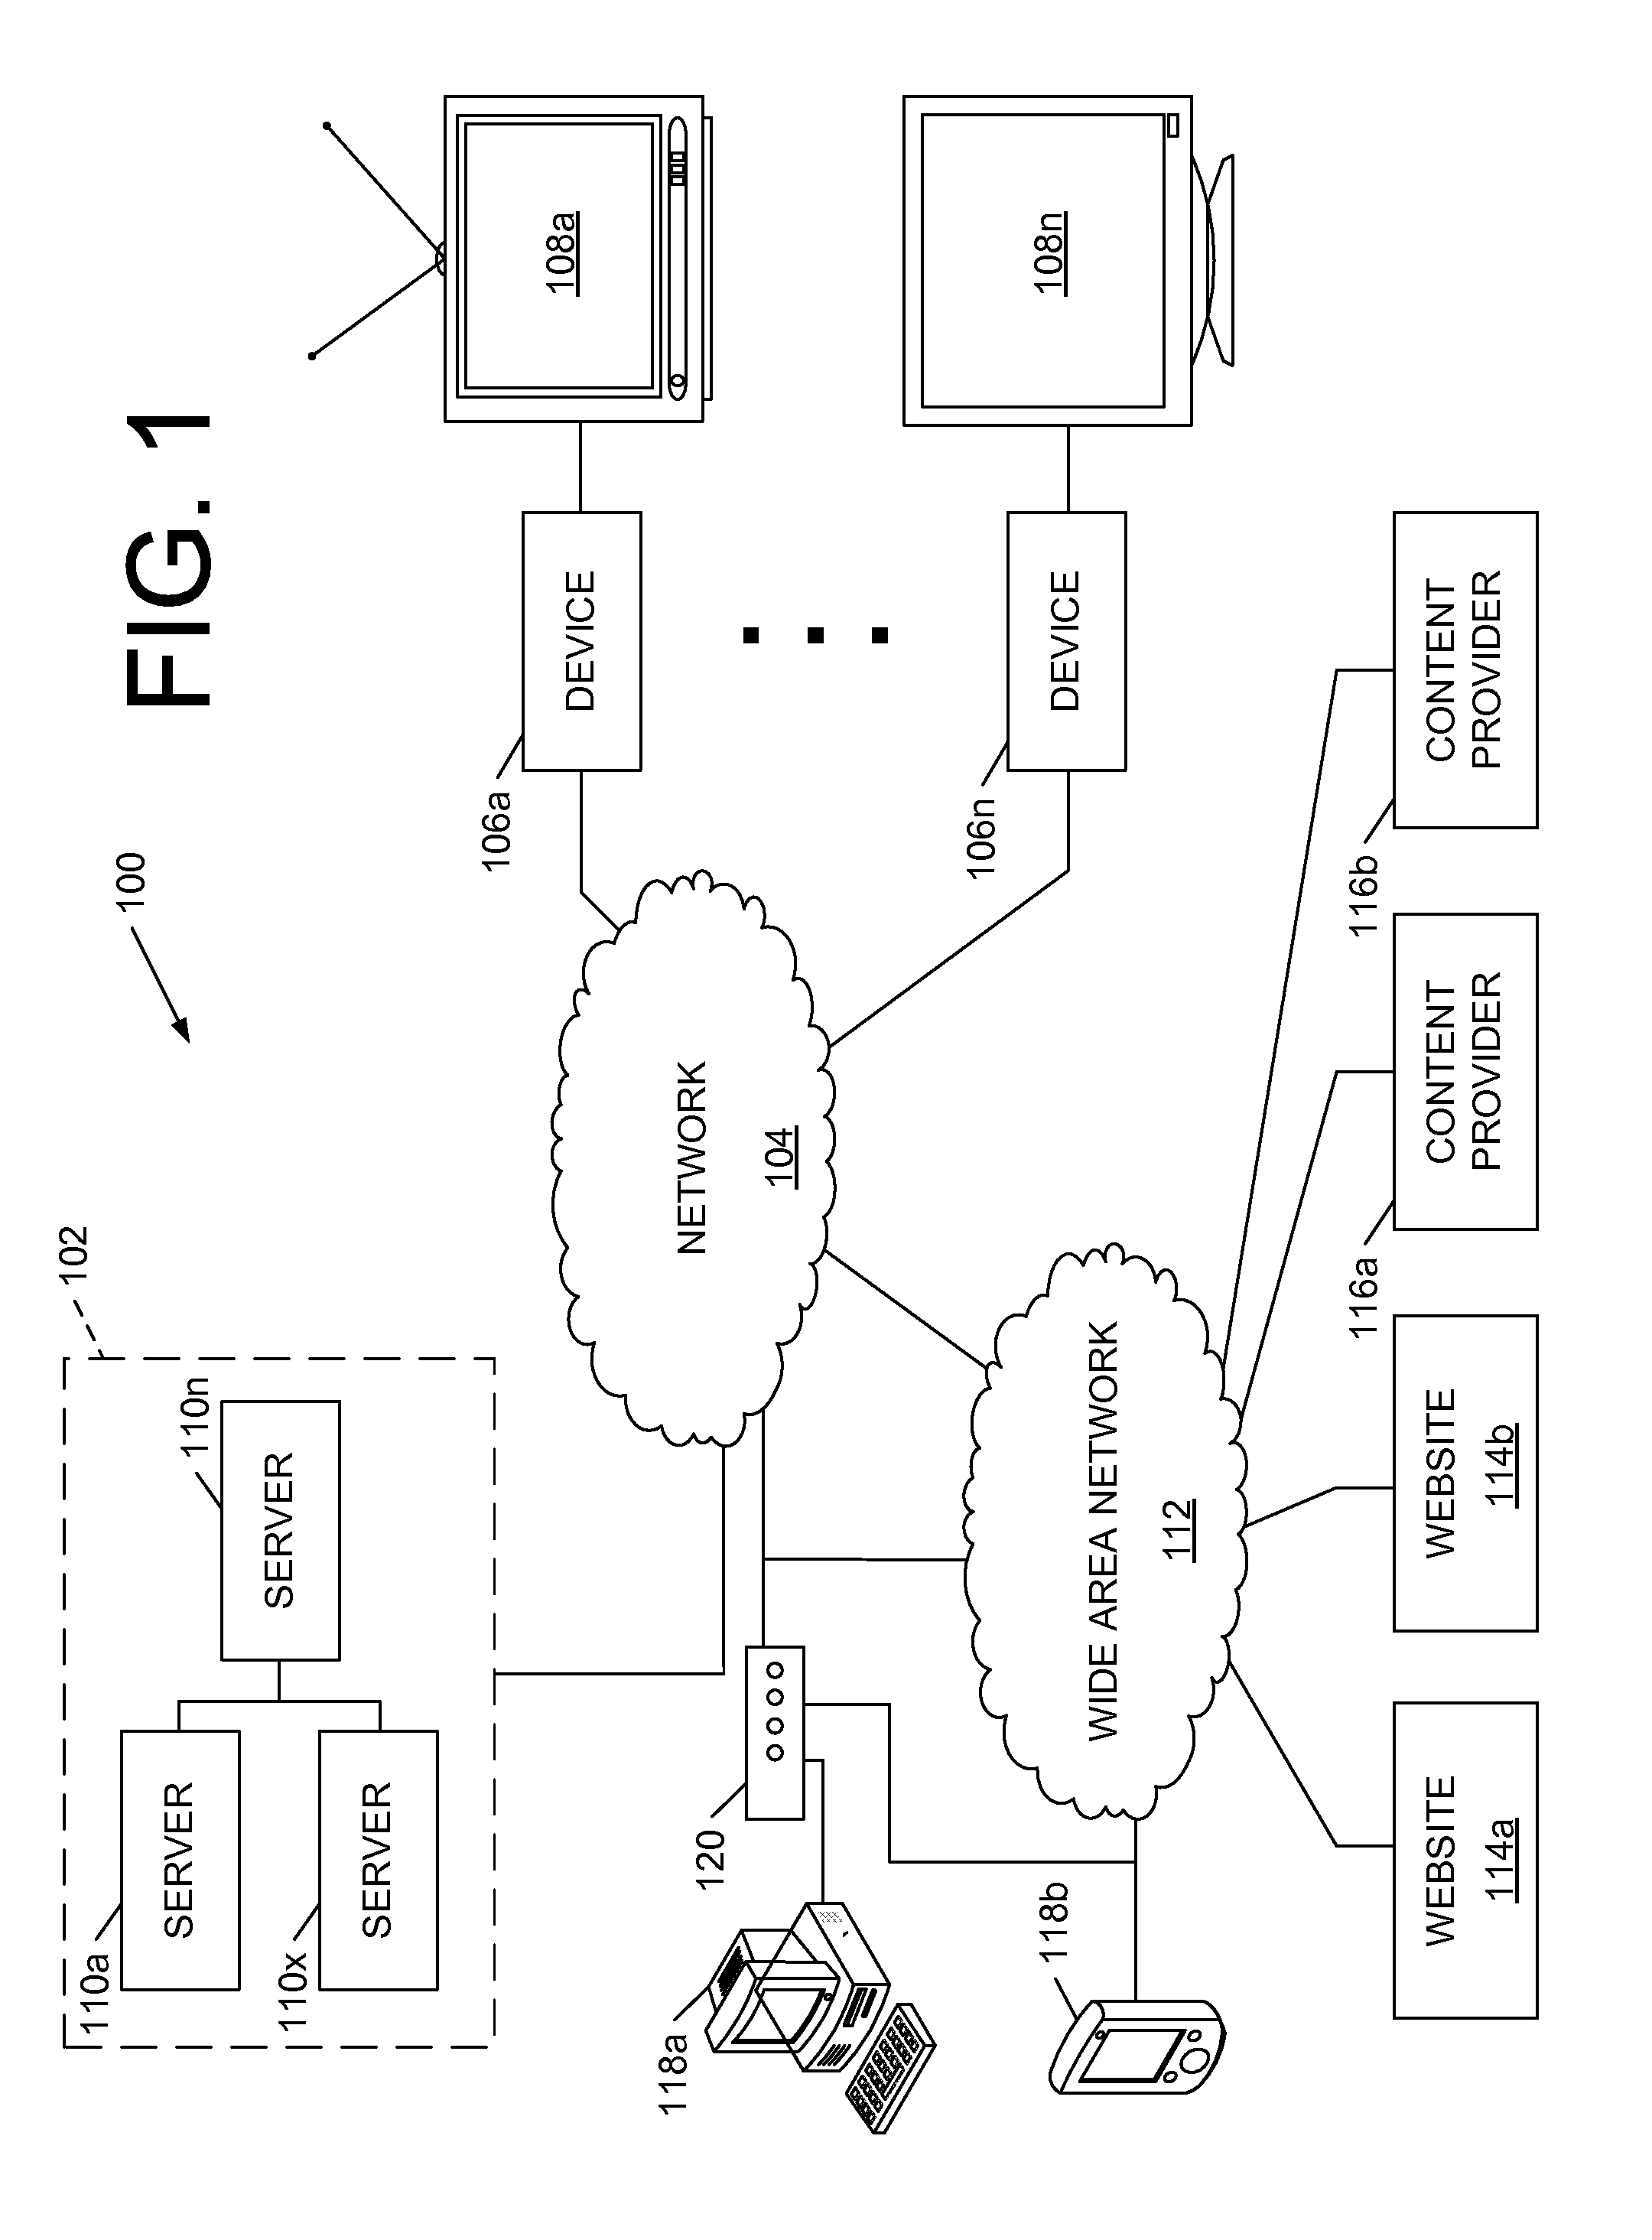 Quality of service for distribution of content to network devices